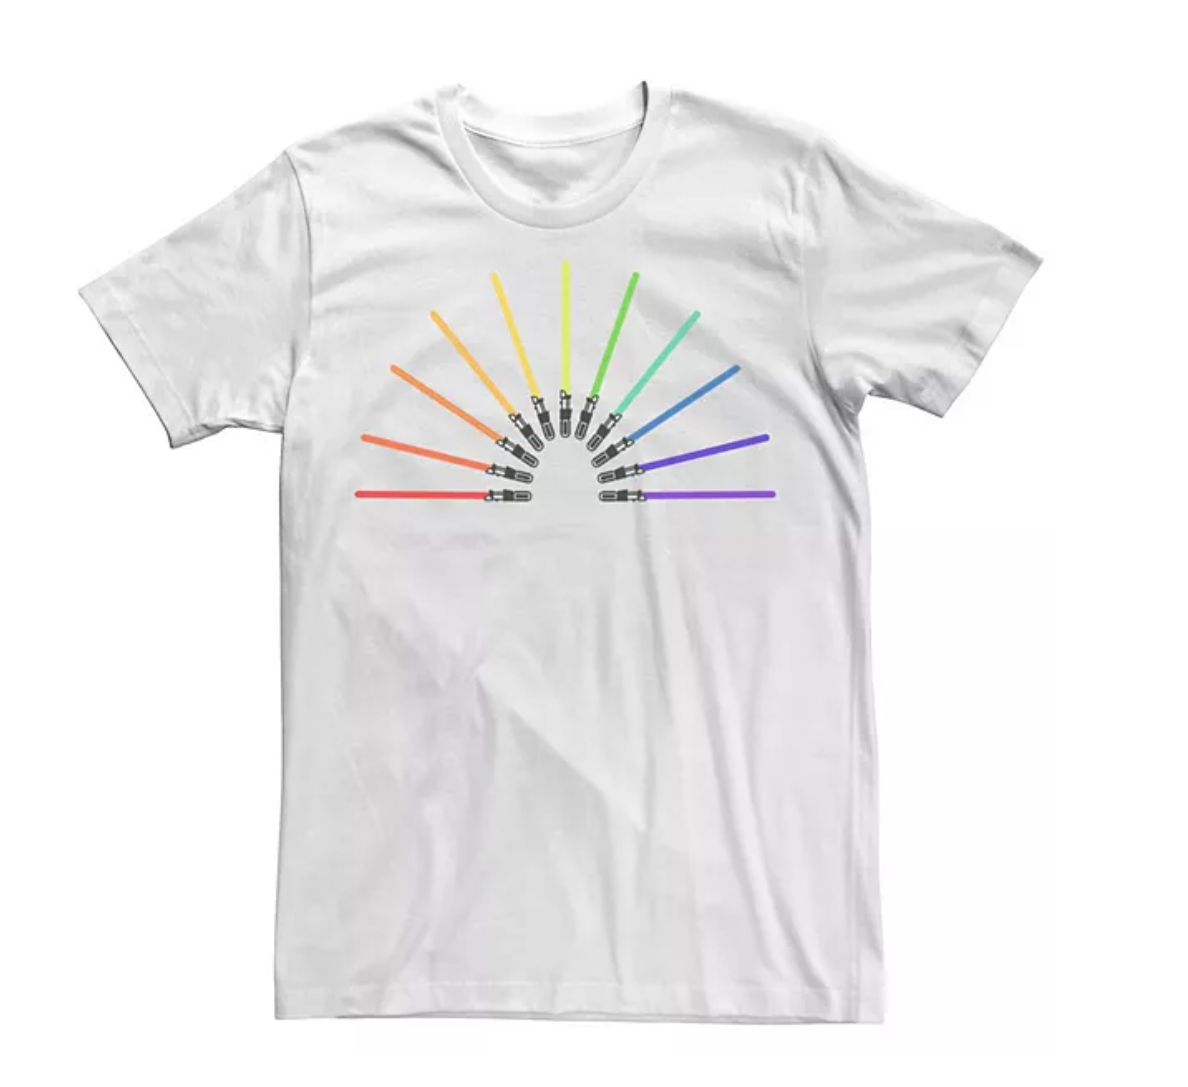 A short sleeve crewneck shirt with lightsabers in each color of the rainbow on it